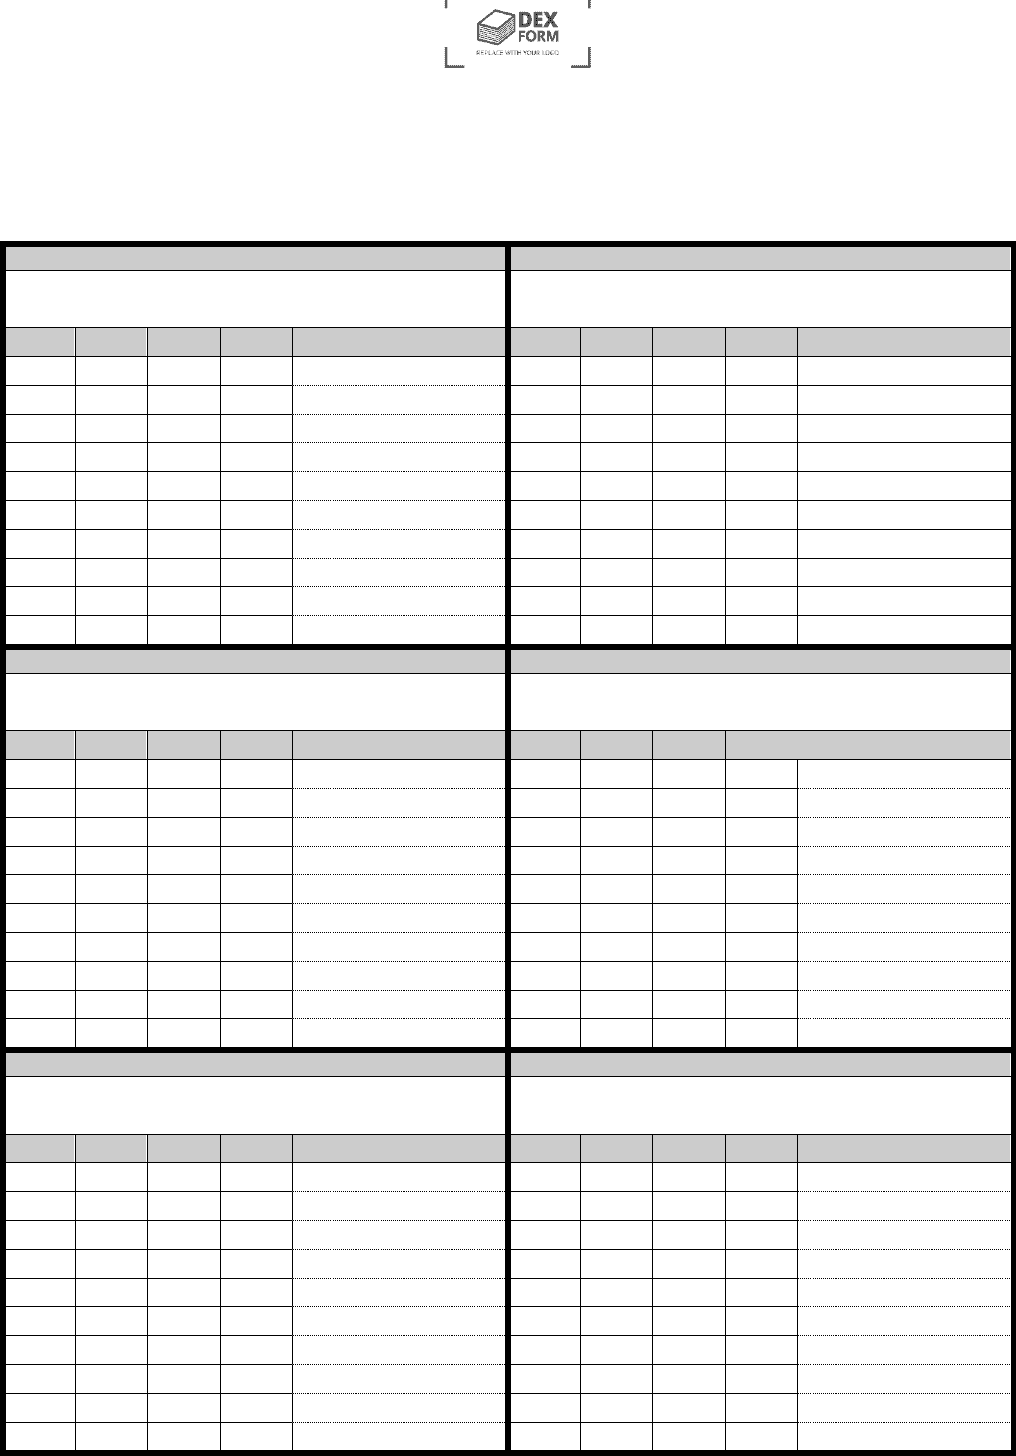 Swimming sample split sheets in Word and Pdf formats